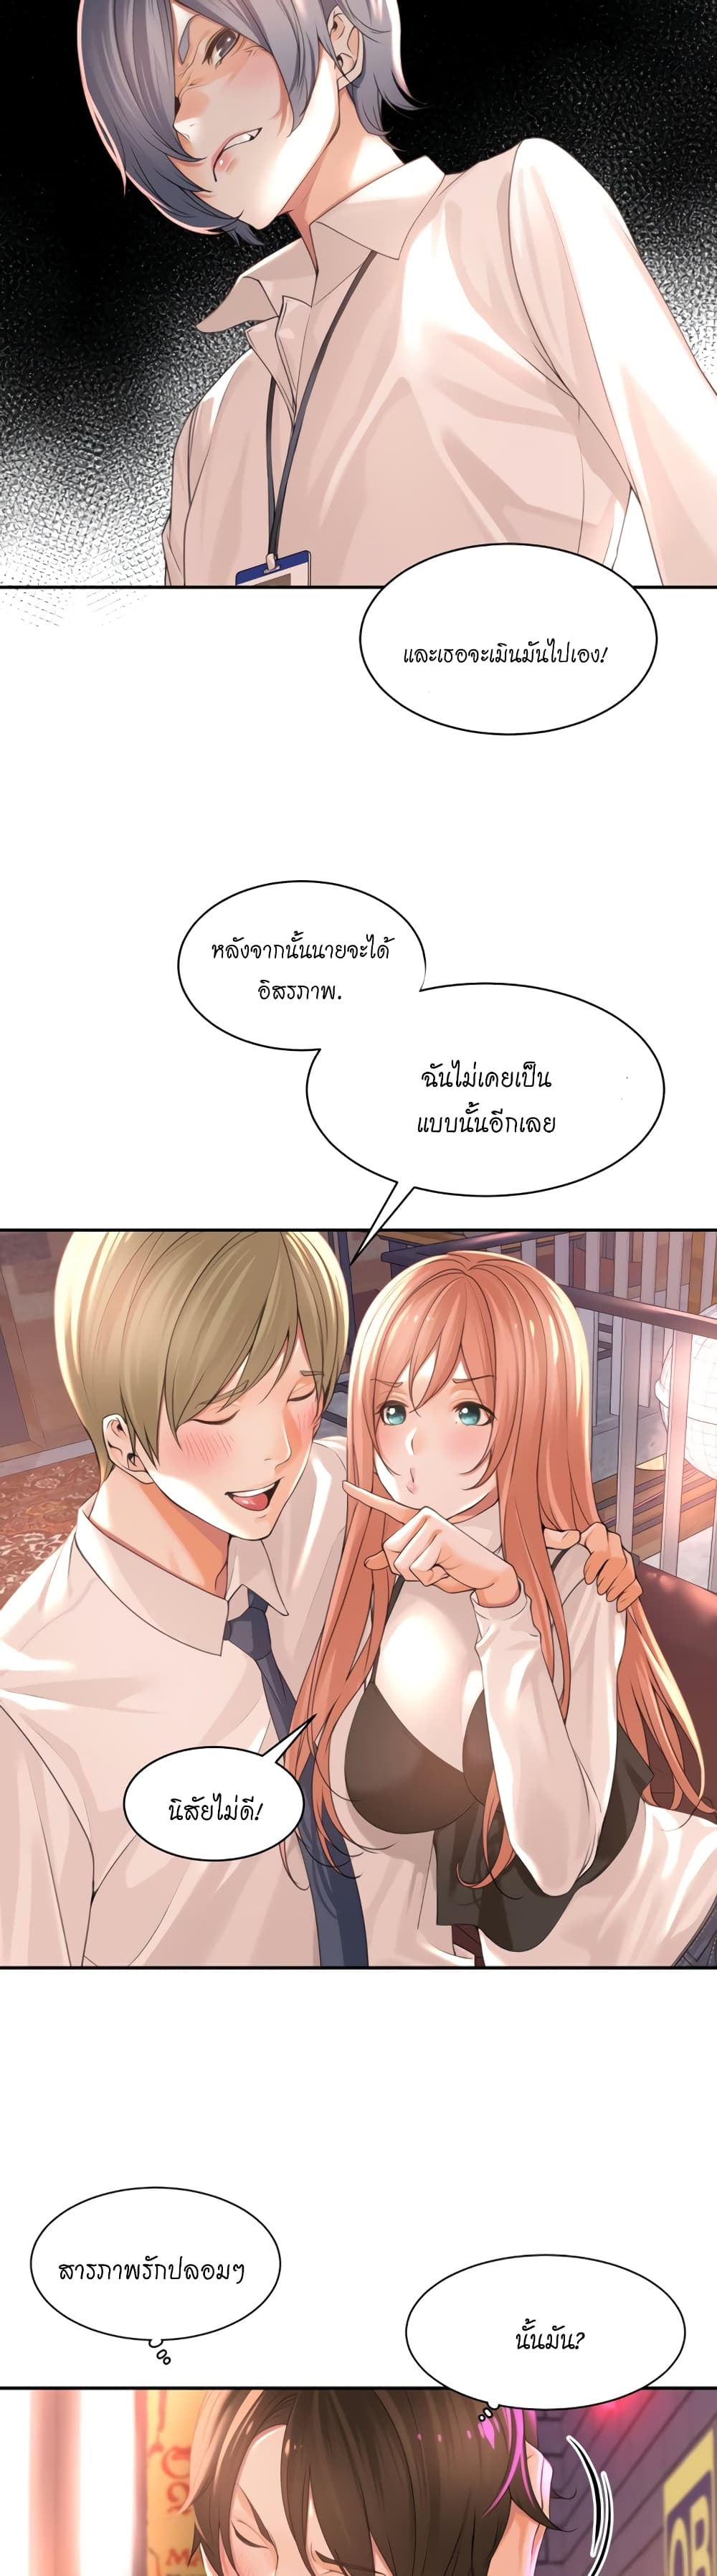 Manager, Please Scold Me ตอนที่ 1 ภาพ 27